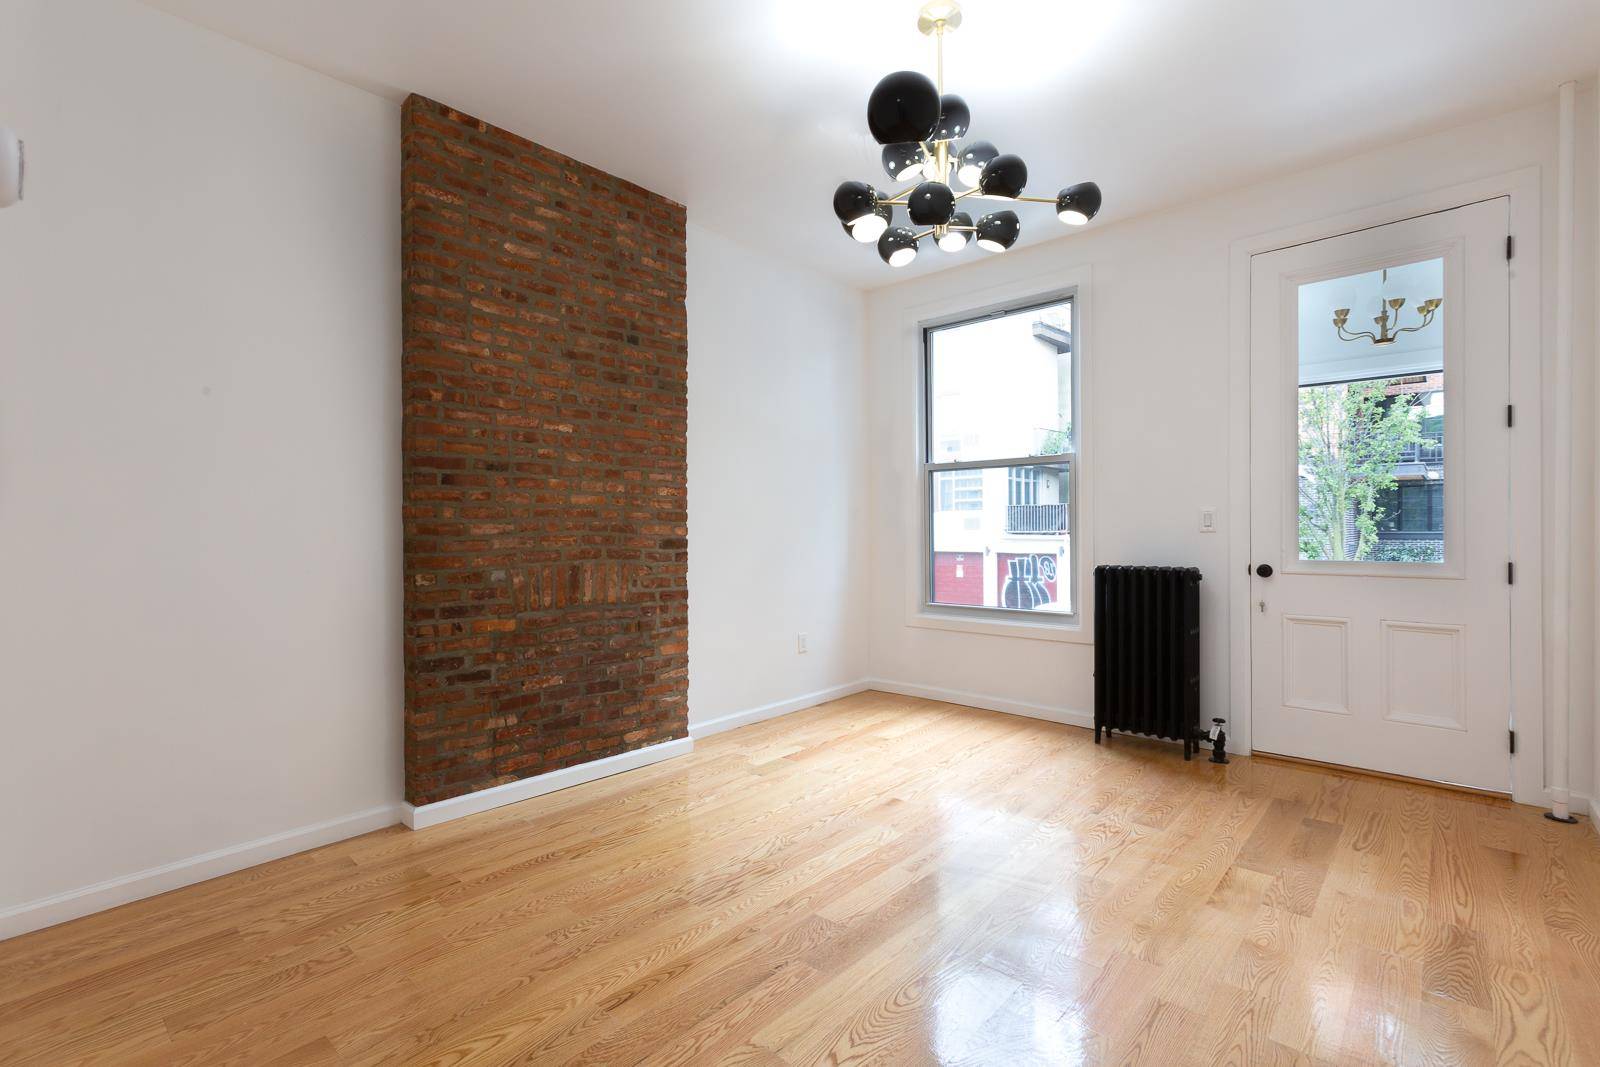 Welcome to 988 Willoughby Avenue, a recently renovated, two family townhouse in the heart of Bushwick.